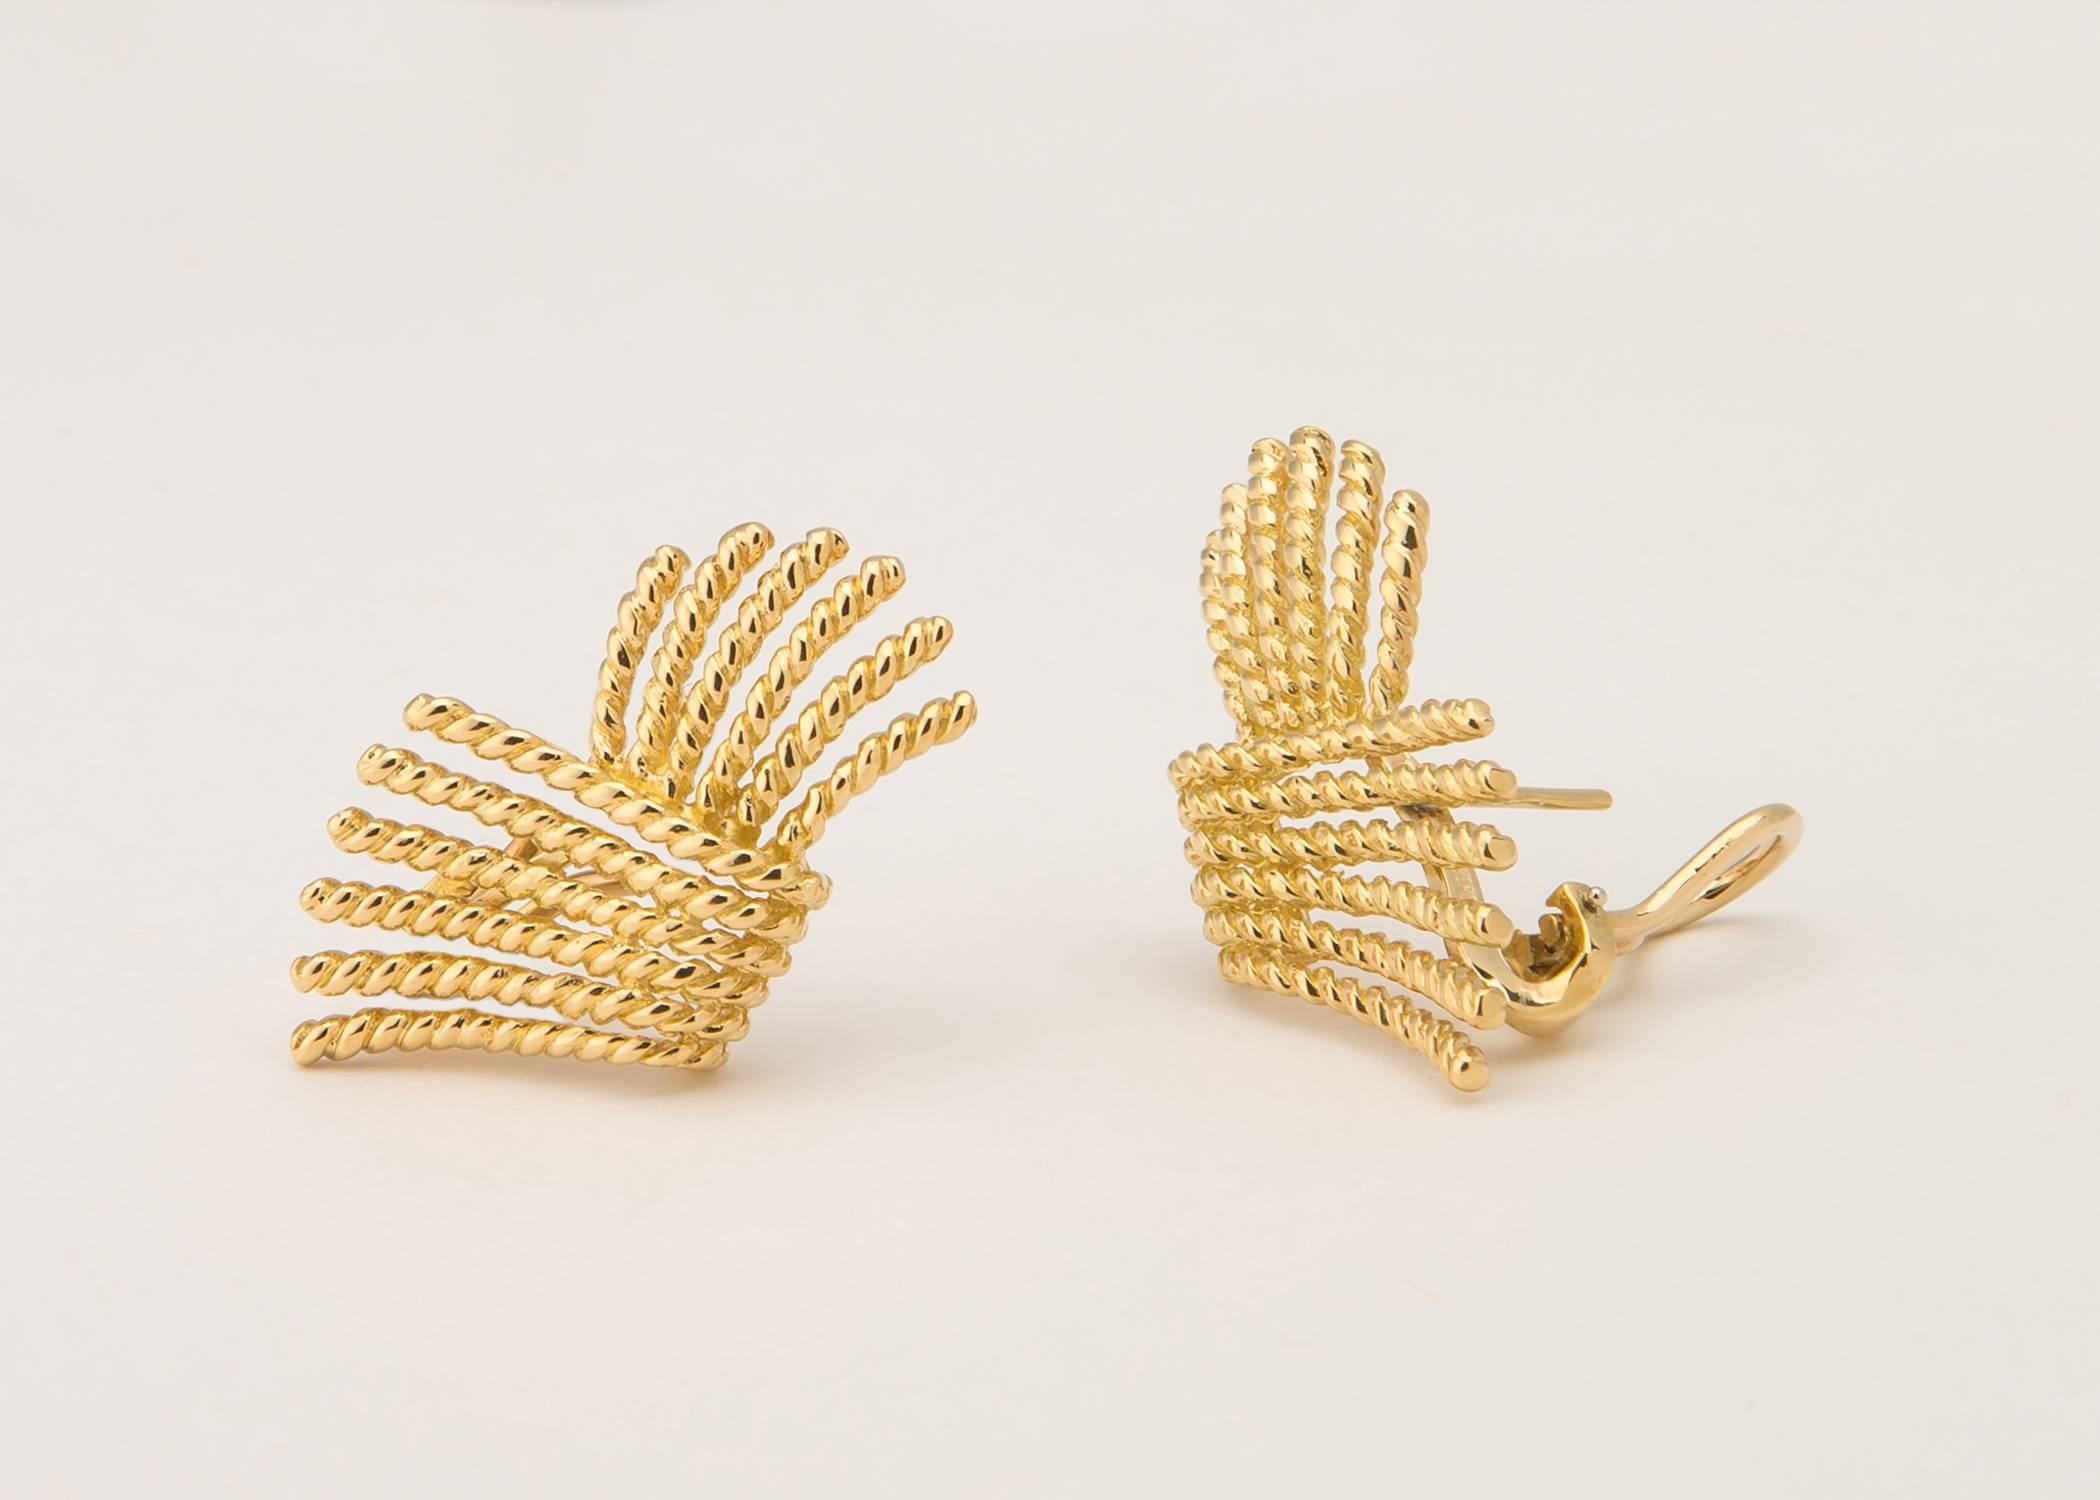 Jean Schlumberger was one of the most important jewelry designers of the 20th century. His classic rope earrings perfectly fits a lady's face. slightly over 1 1/4 inches in size. These will become your everyday go to gold earrings !!! Please view